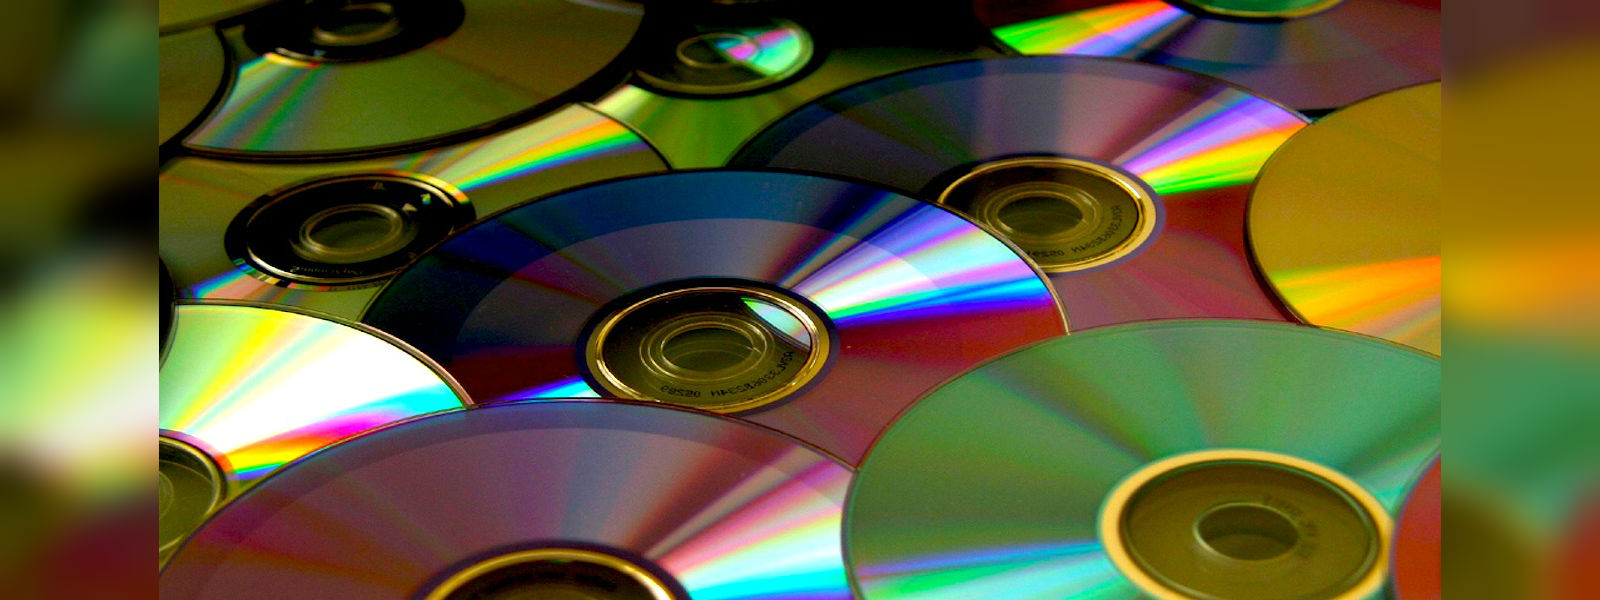 Bulk of CDs containing extremist lectures seized